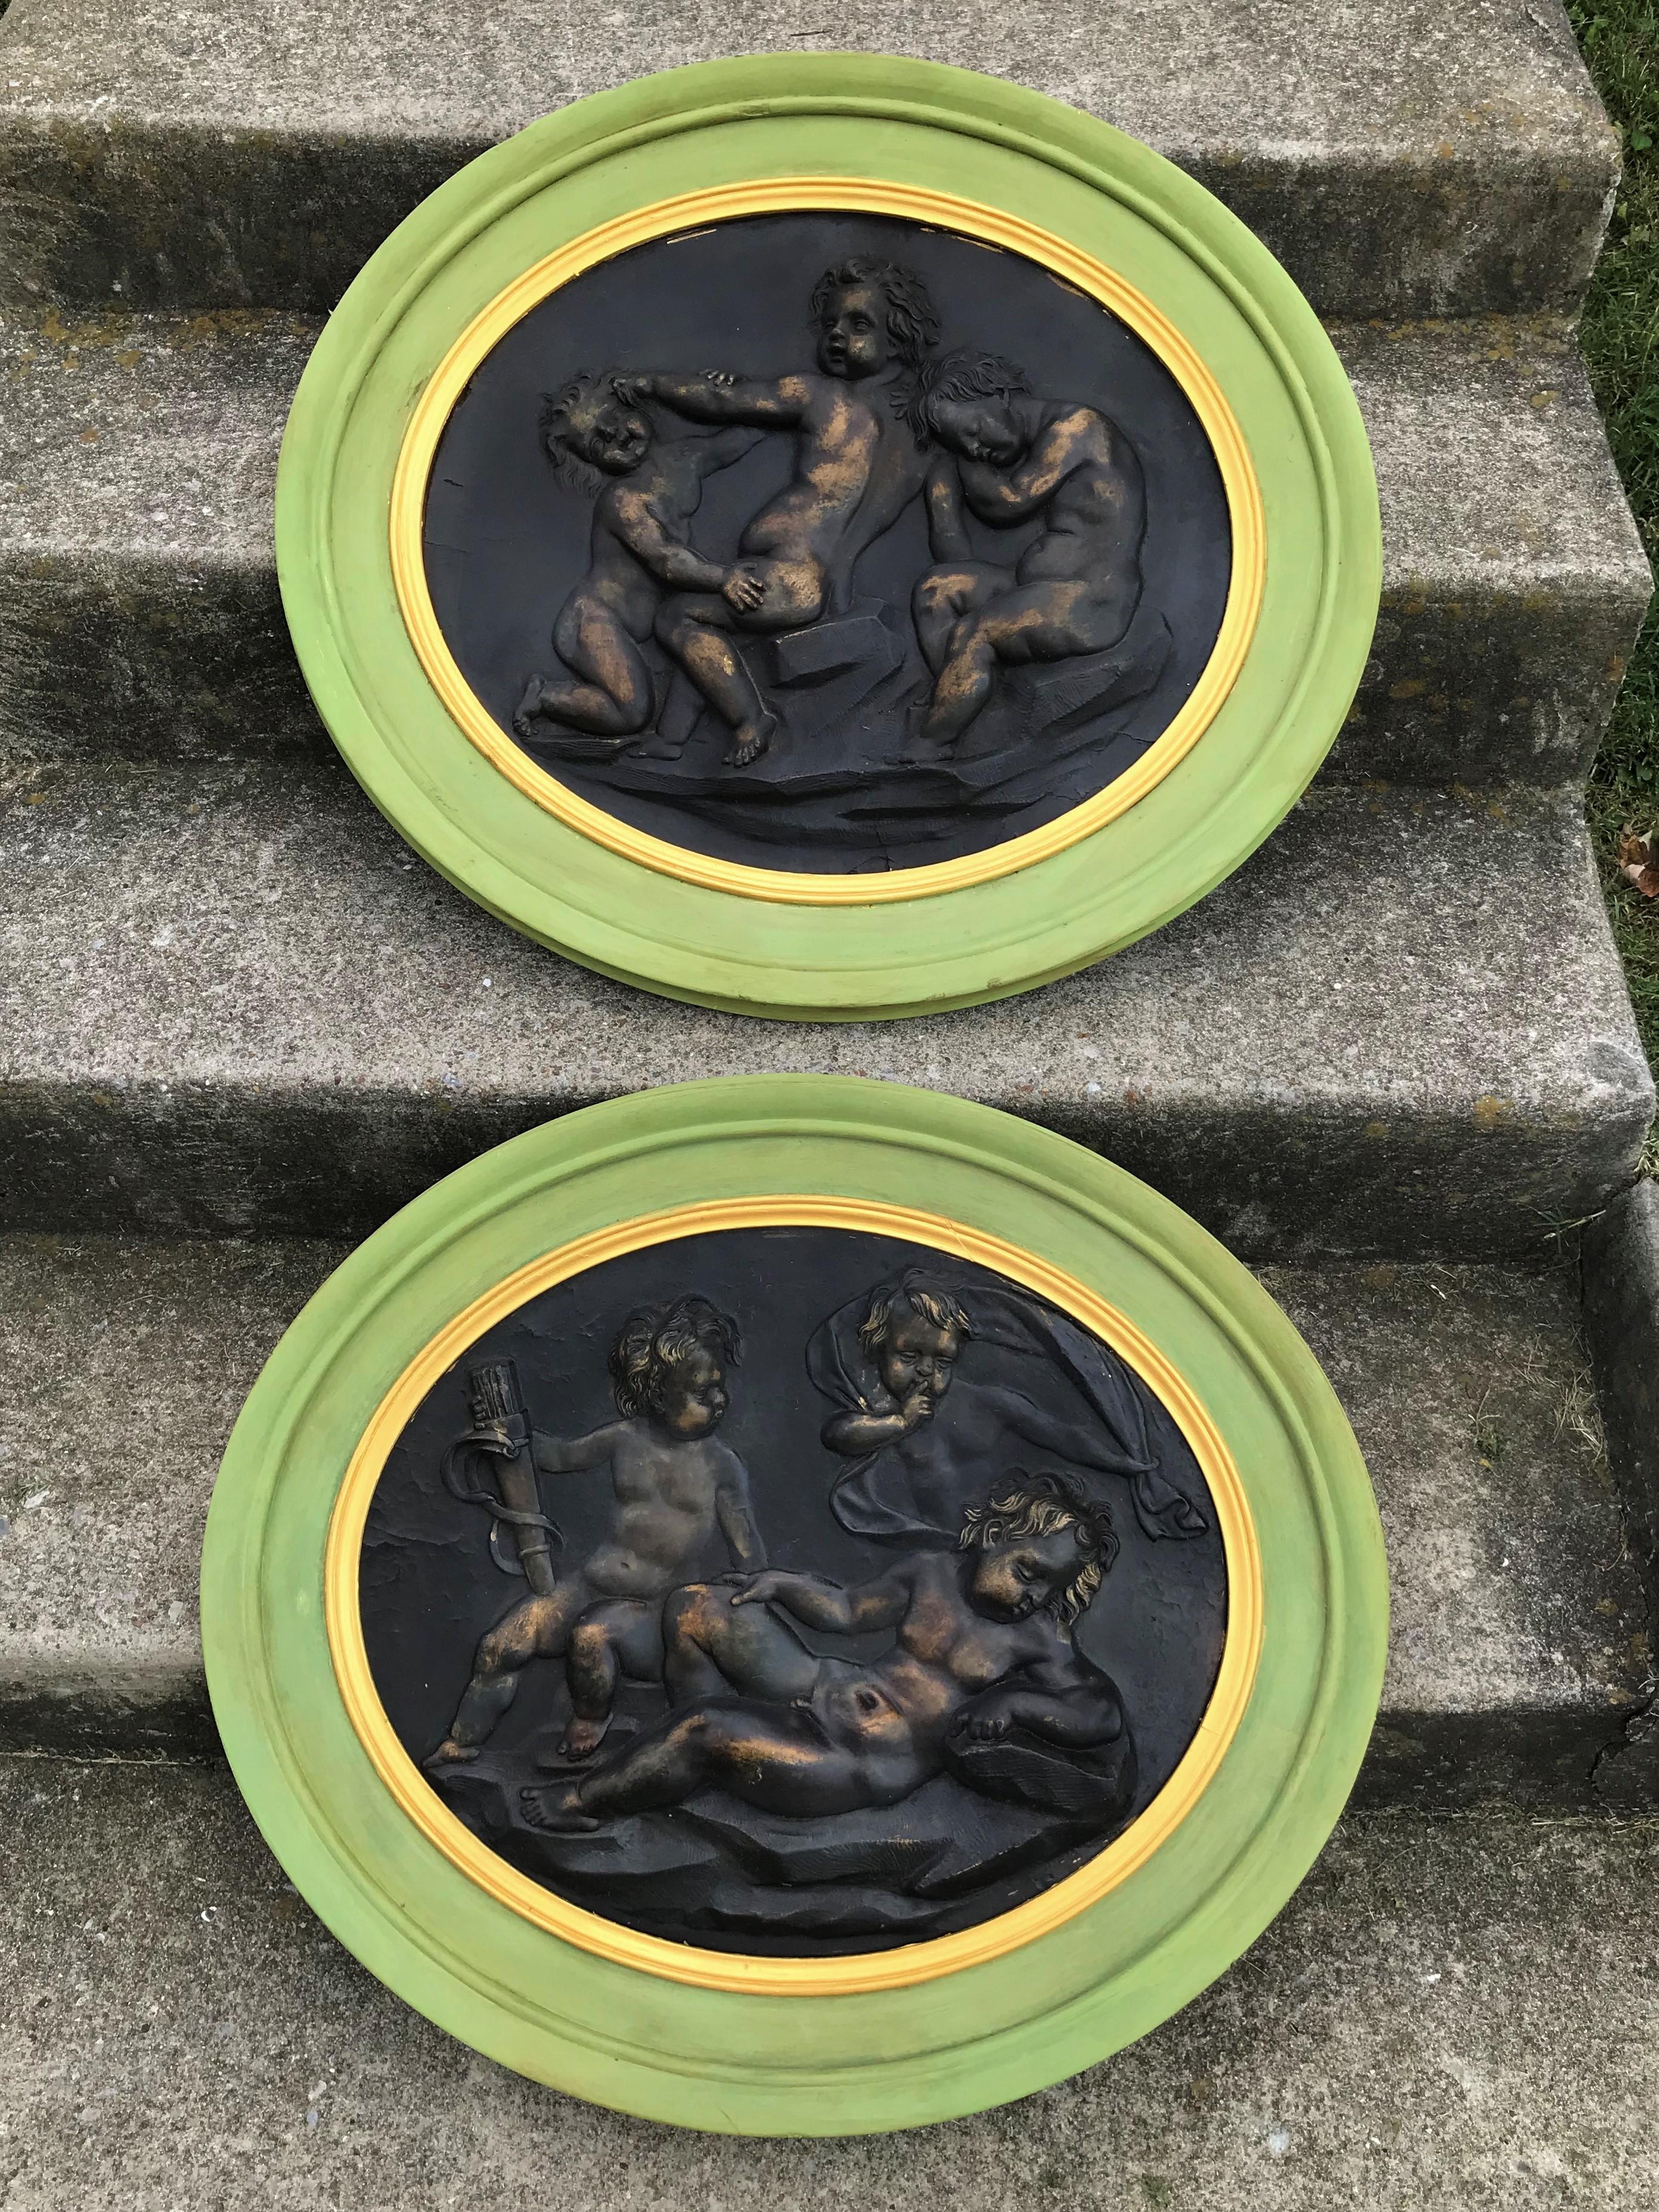 Set of continental composition wall plaques or medallions of frolicking or playful putti / cherubs (children). Mint green wood frame.

Chips, nicks, wear to frames, probably a later paint or repaint. The patinated center subjects in very good